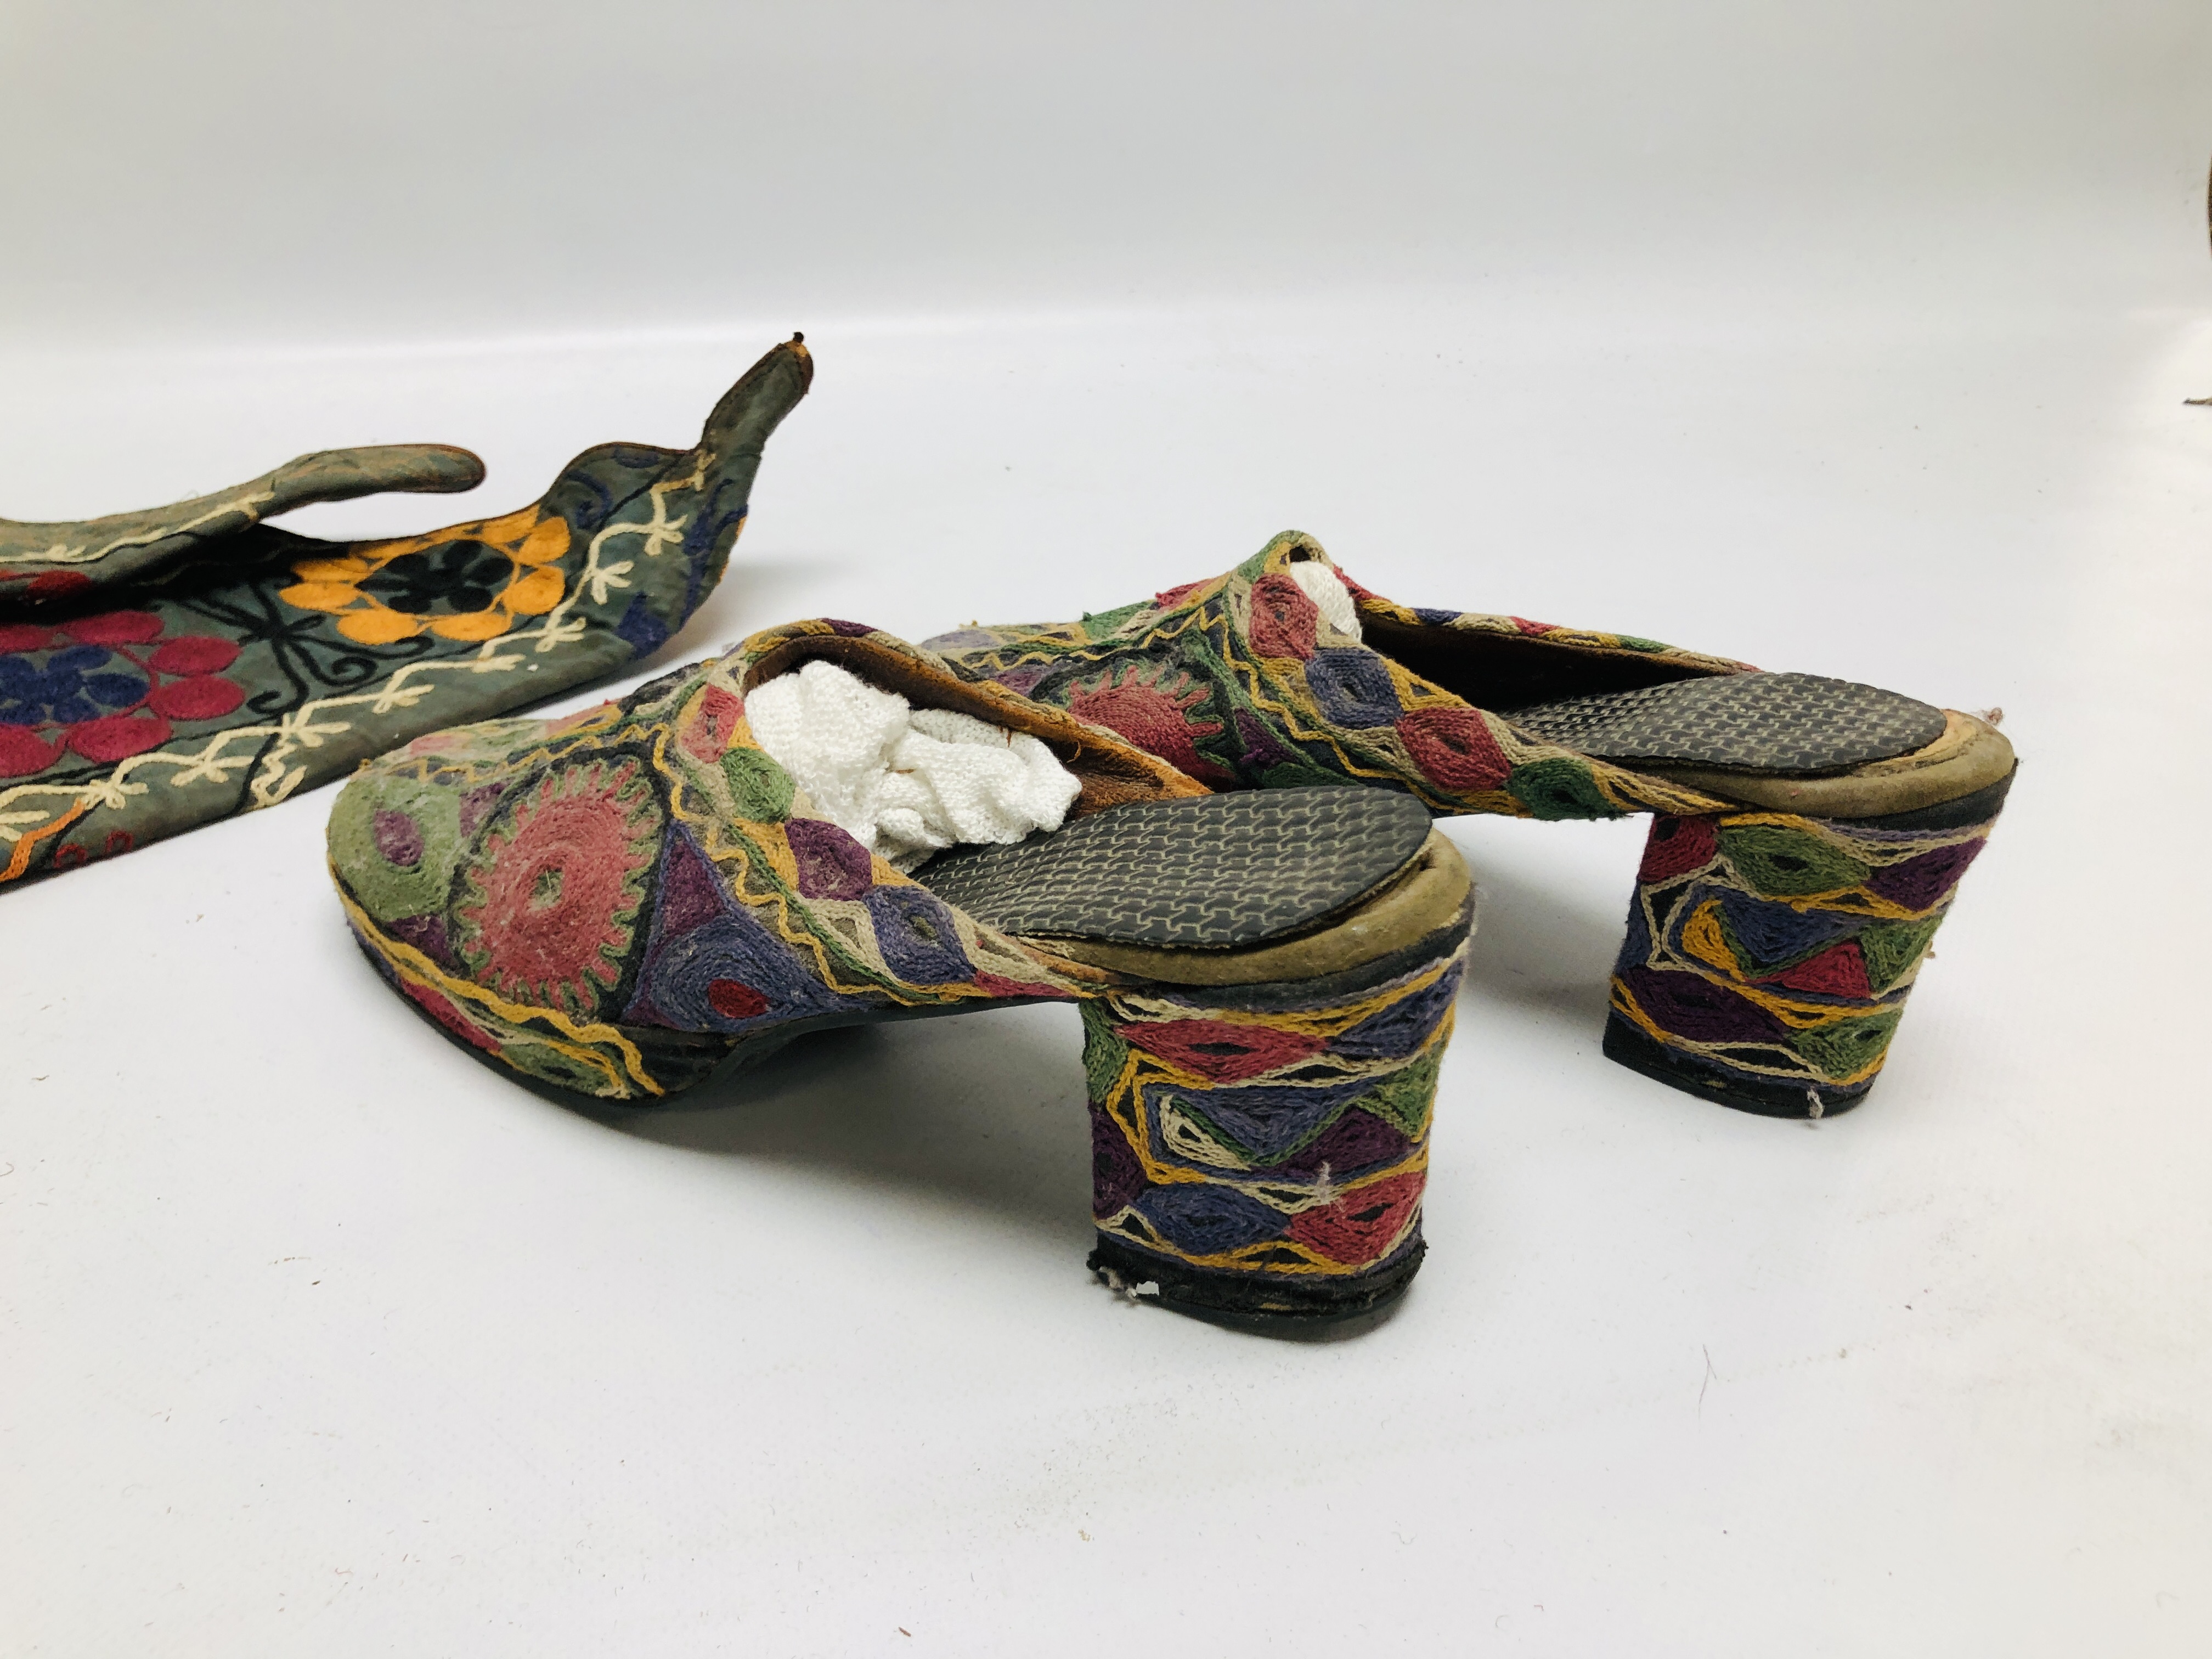 A PAIR OF MID C20TH AFGHAN EMBROIDERED SHOES ALONG WITH A PAIR OF EMBROIDERED BOOTS. - Image 4 of 10